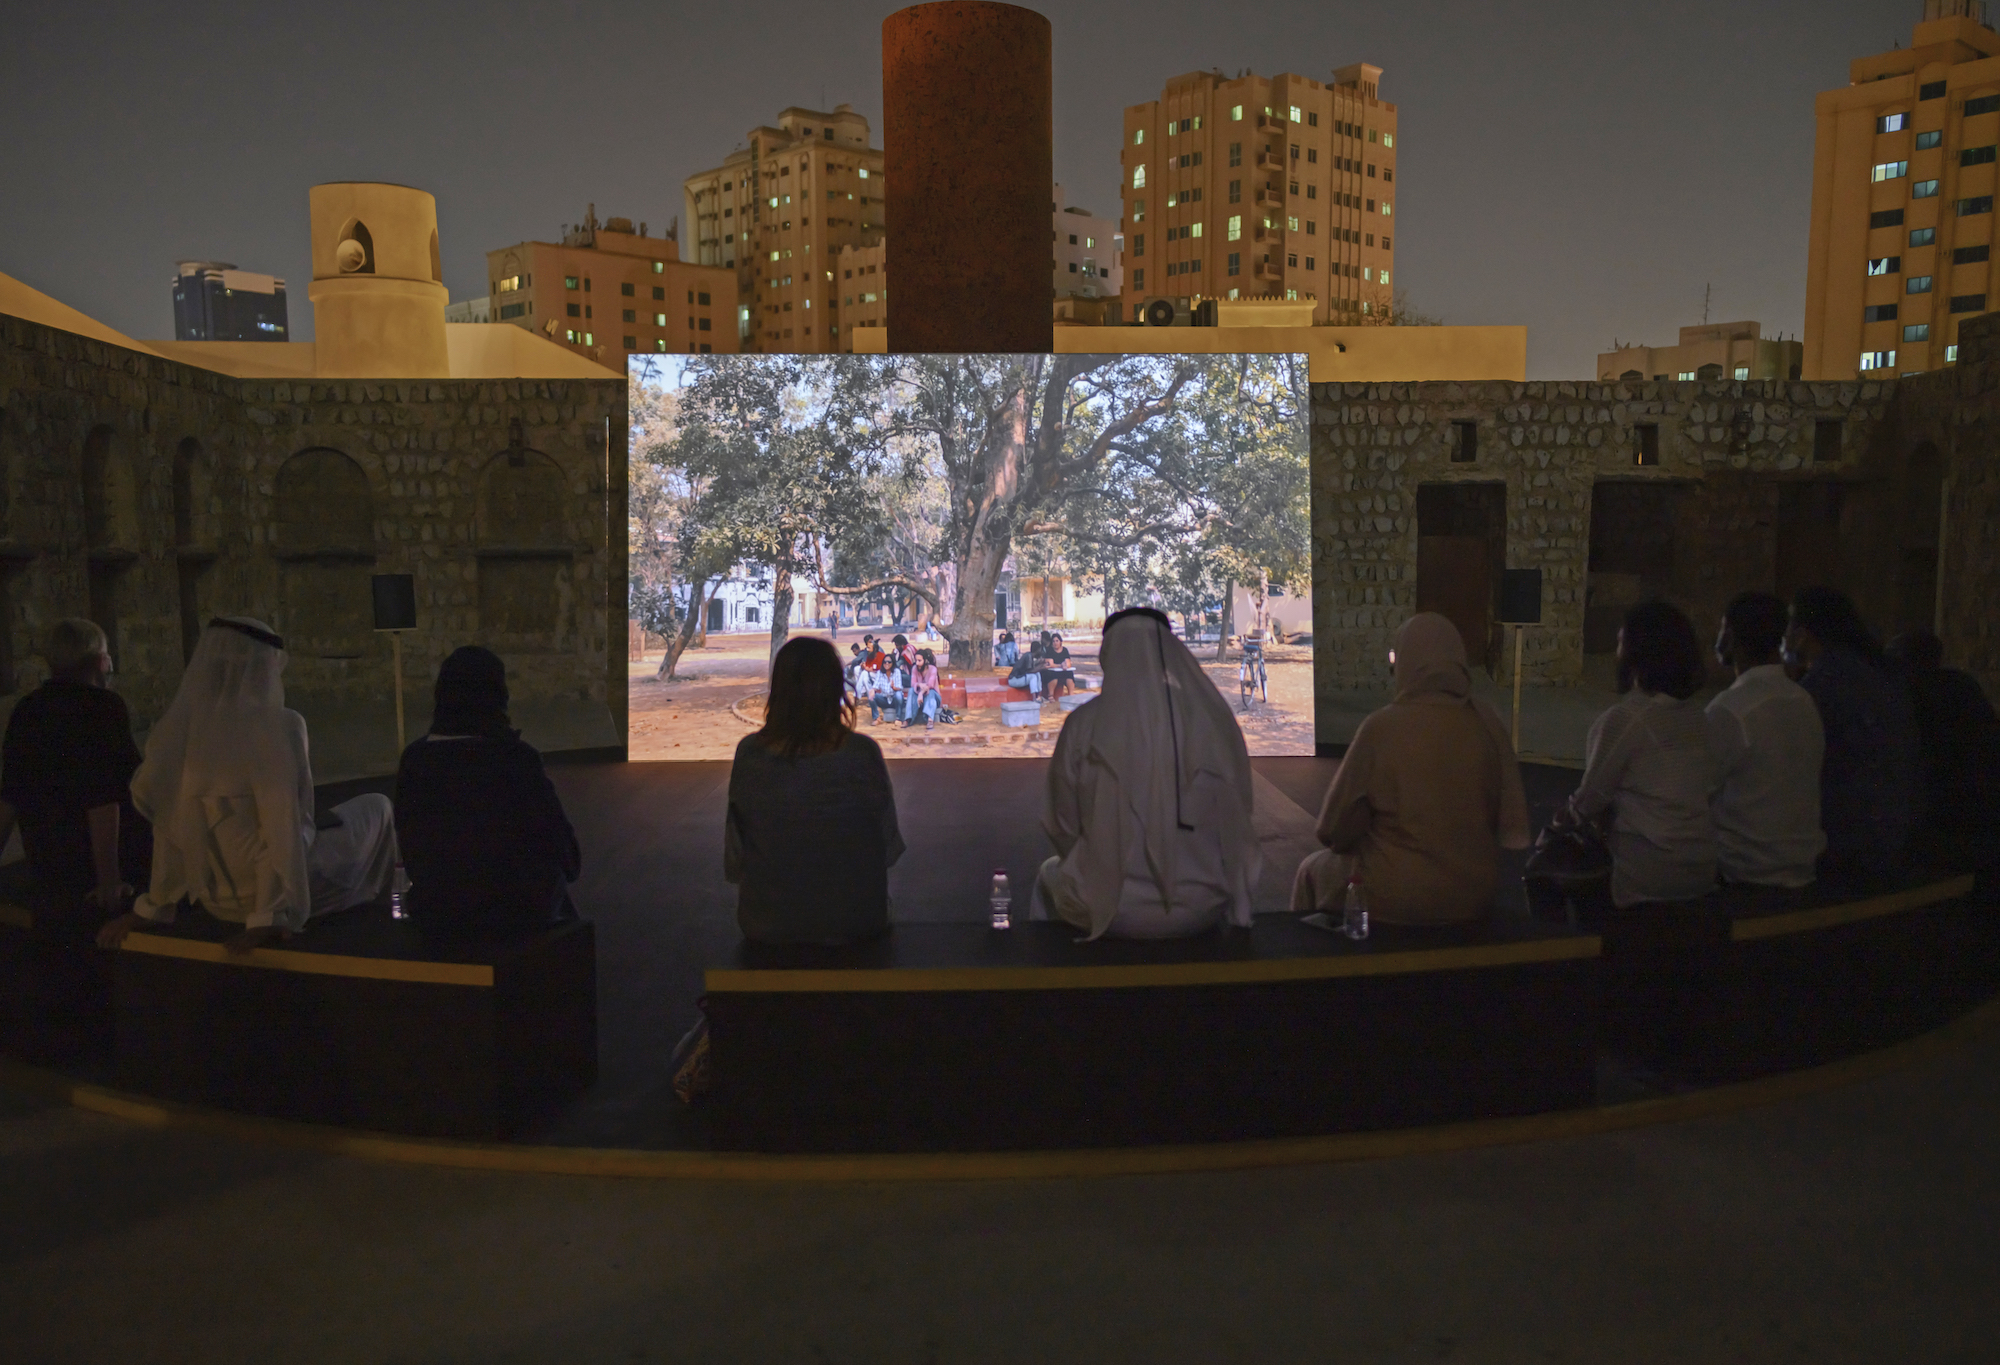 A group of people sit in a semi-circle in the foreground in a courtyard, viewing a move on a screen in the center depicting a group of people around a tree.